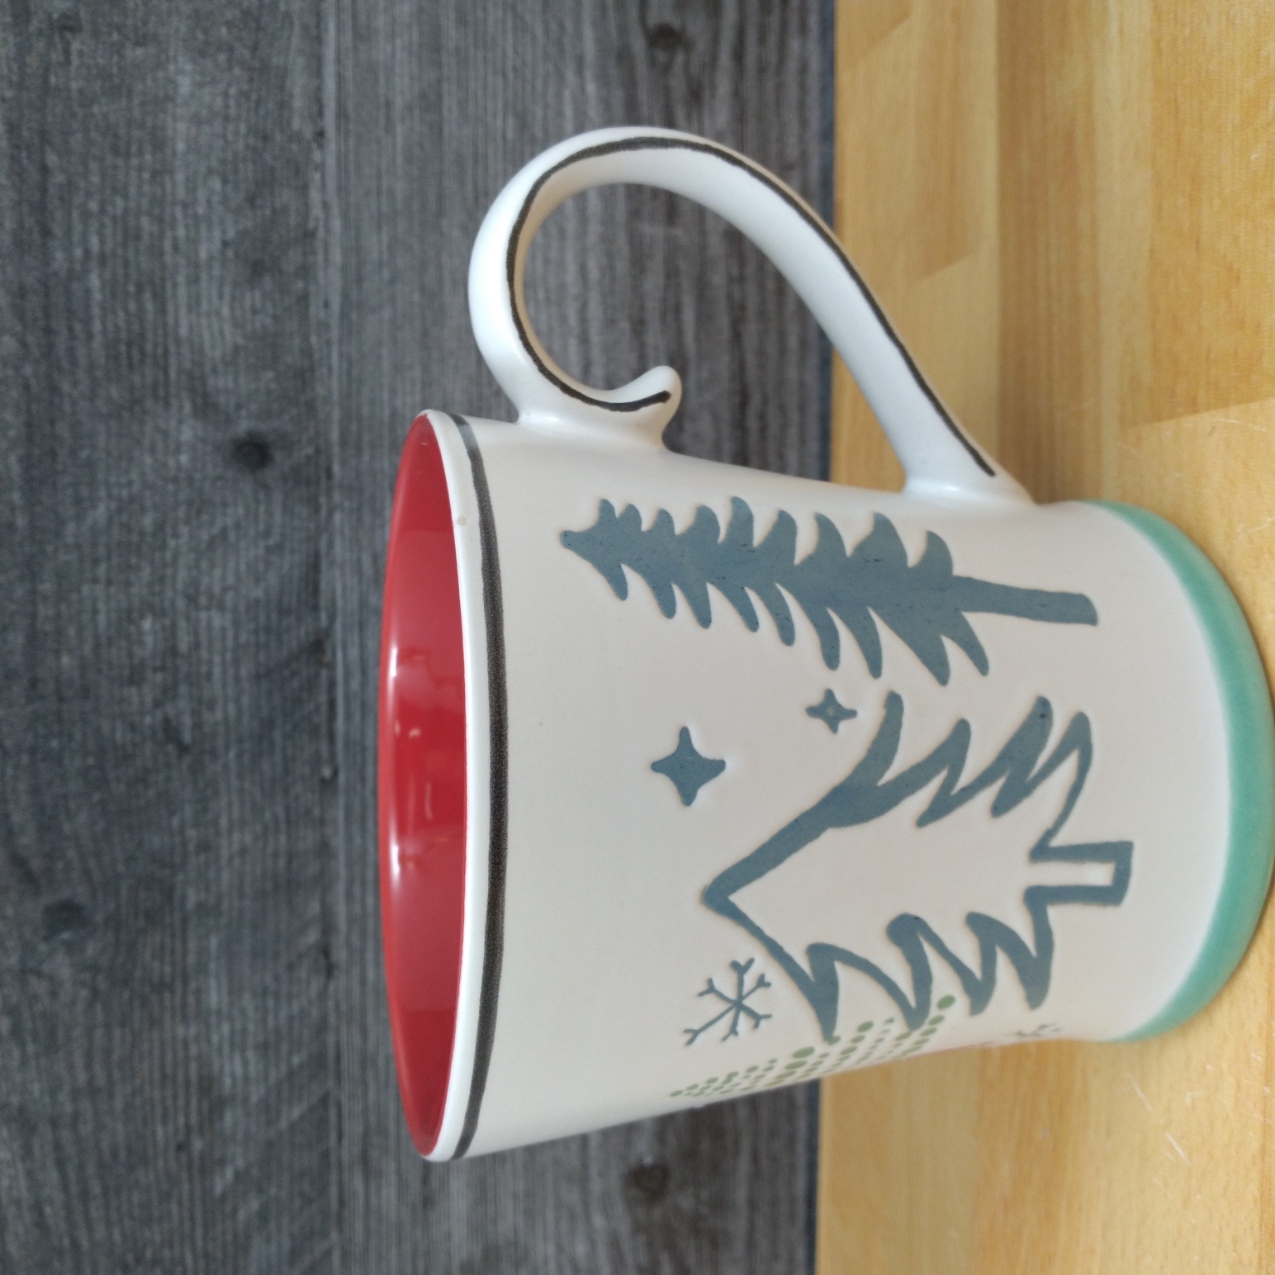 This Holiday Winter Scene Coffee Mug 17oz (455ml) Embossed Christmas Cup Blue Sky is made with love by Premier Homegoods! Shop more unique gift ideas today with Spots Initiatives, the best way to support creators.